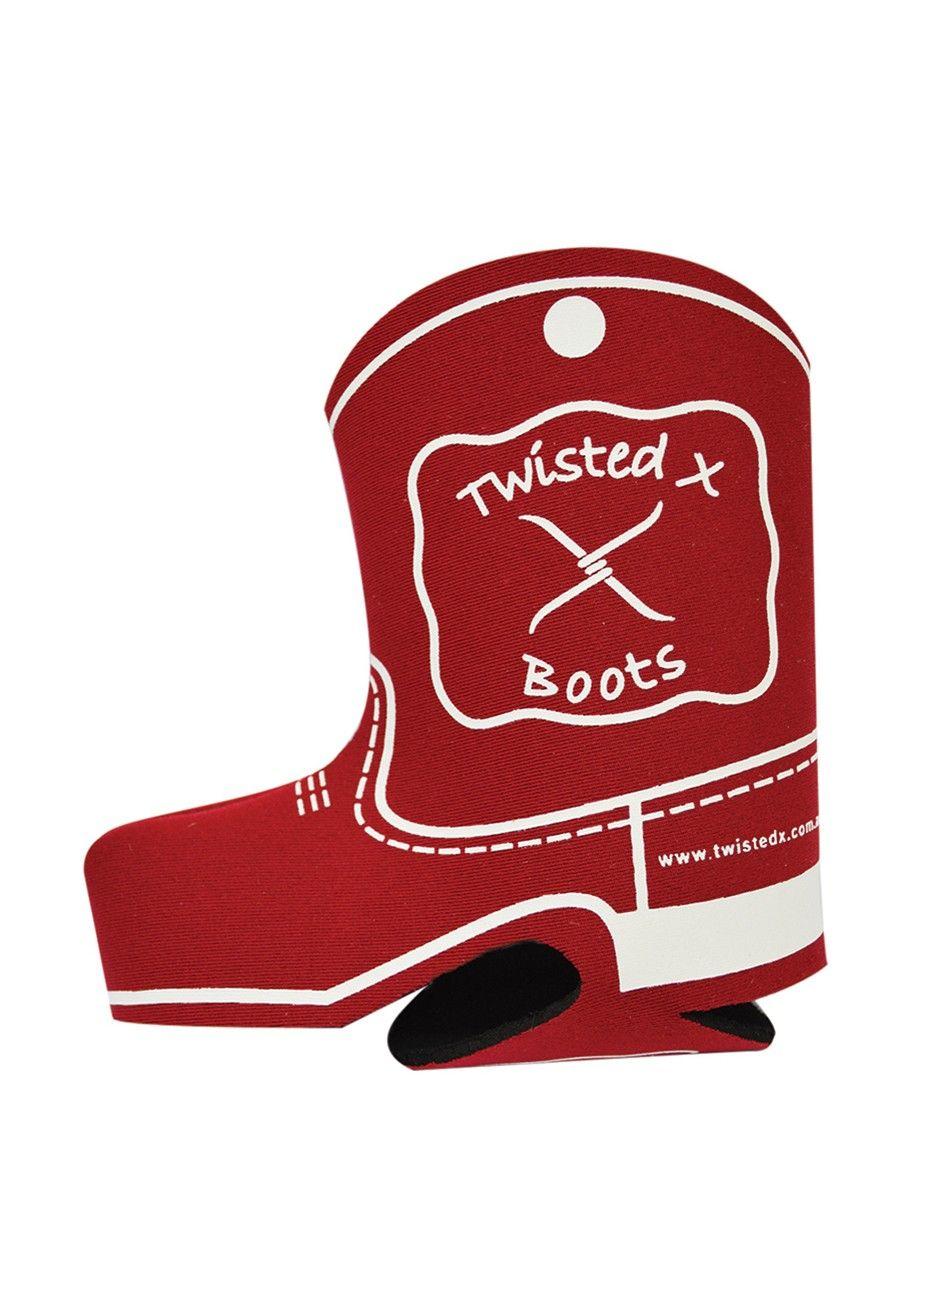 Twisted X Logo - Twisted X Boots Logo - Boot Stubby Holder | Twisted X